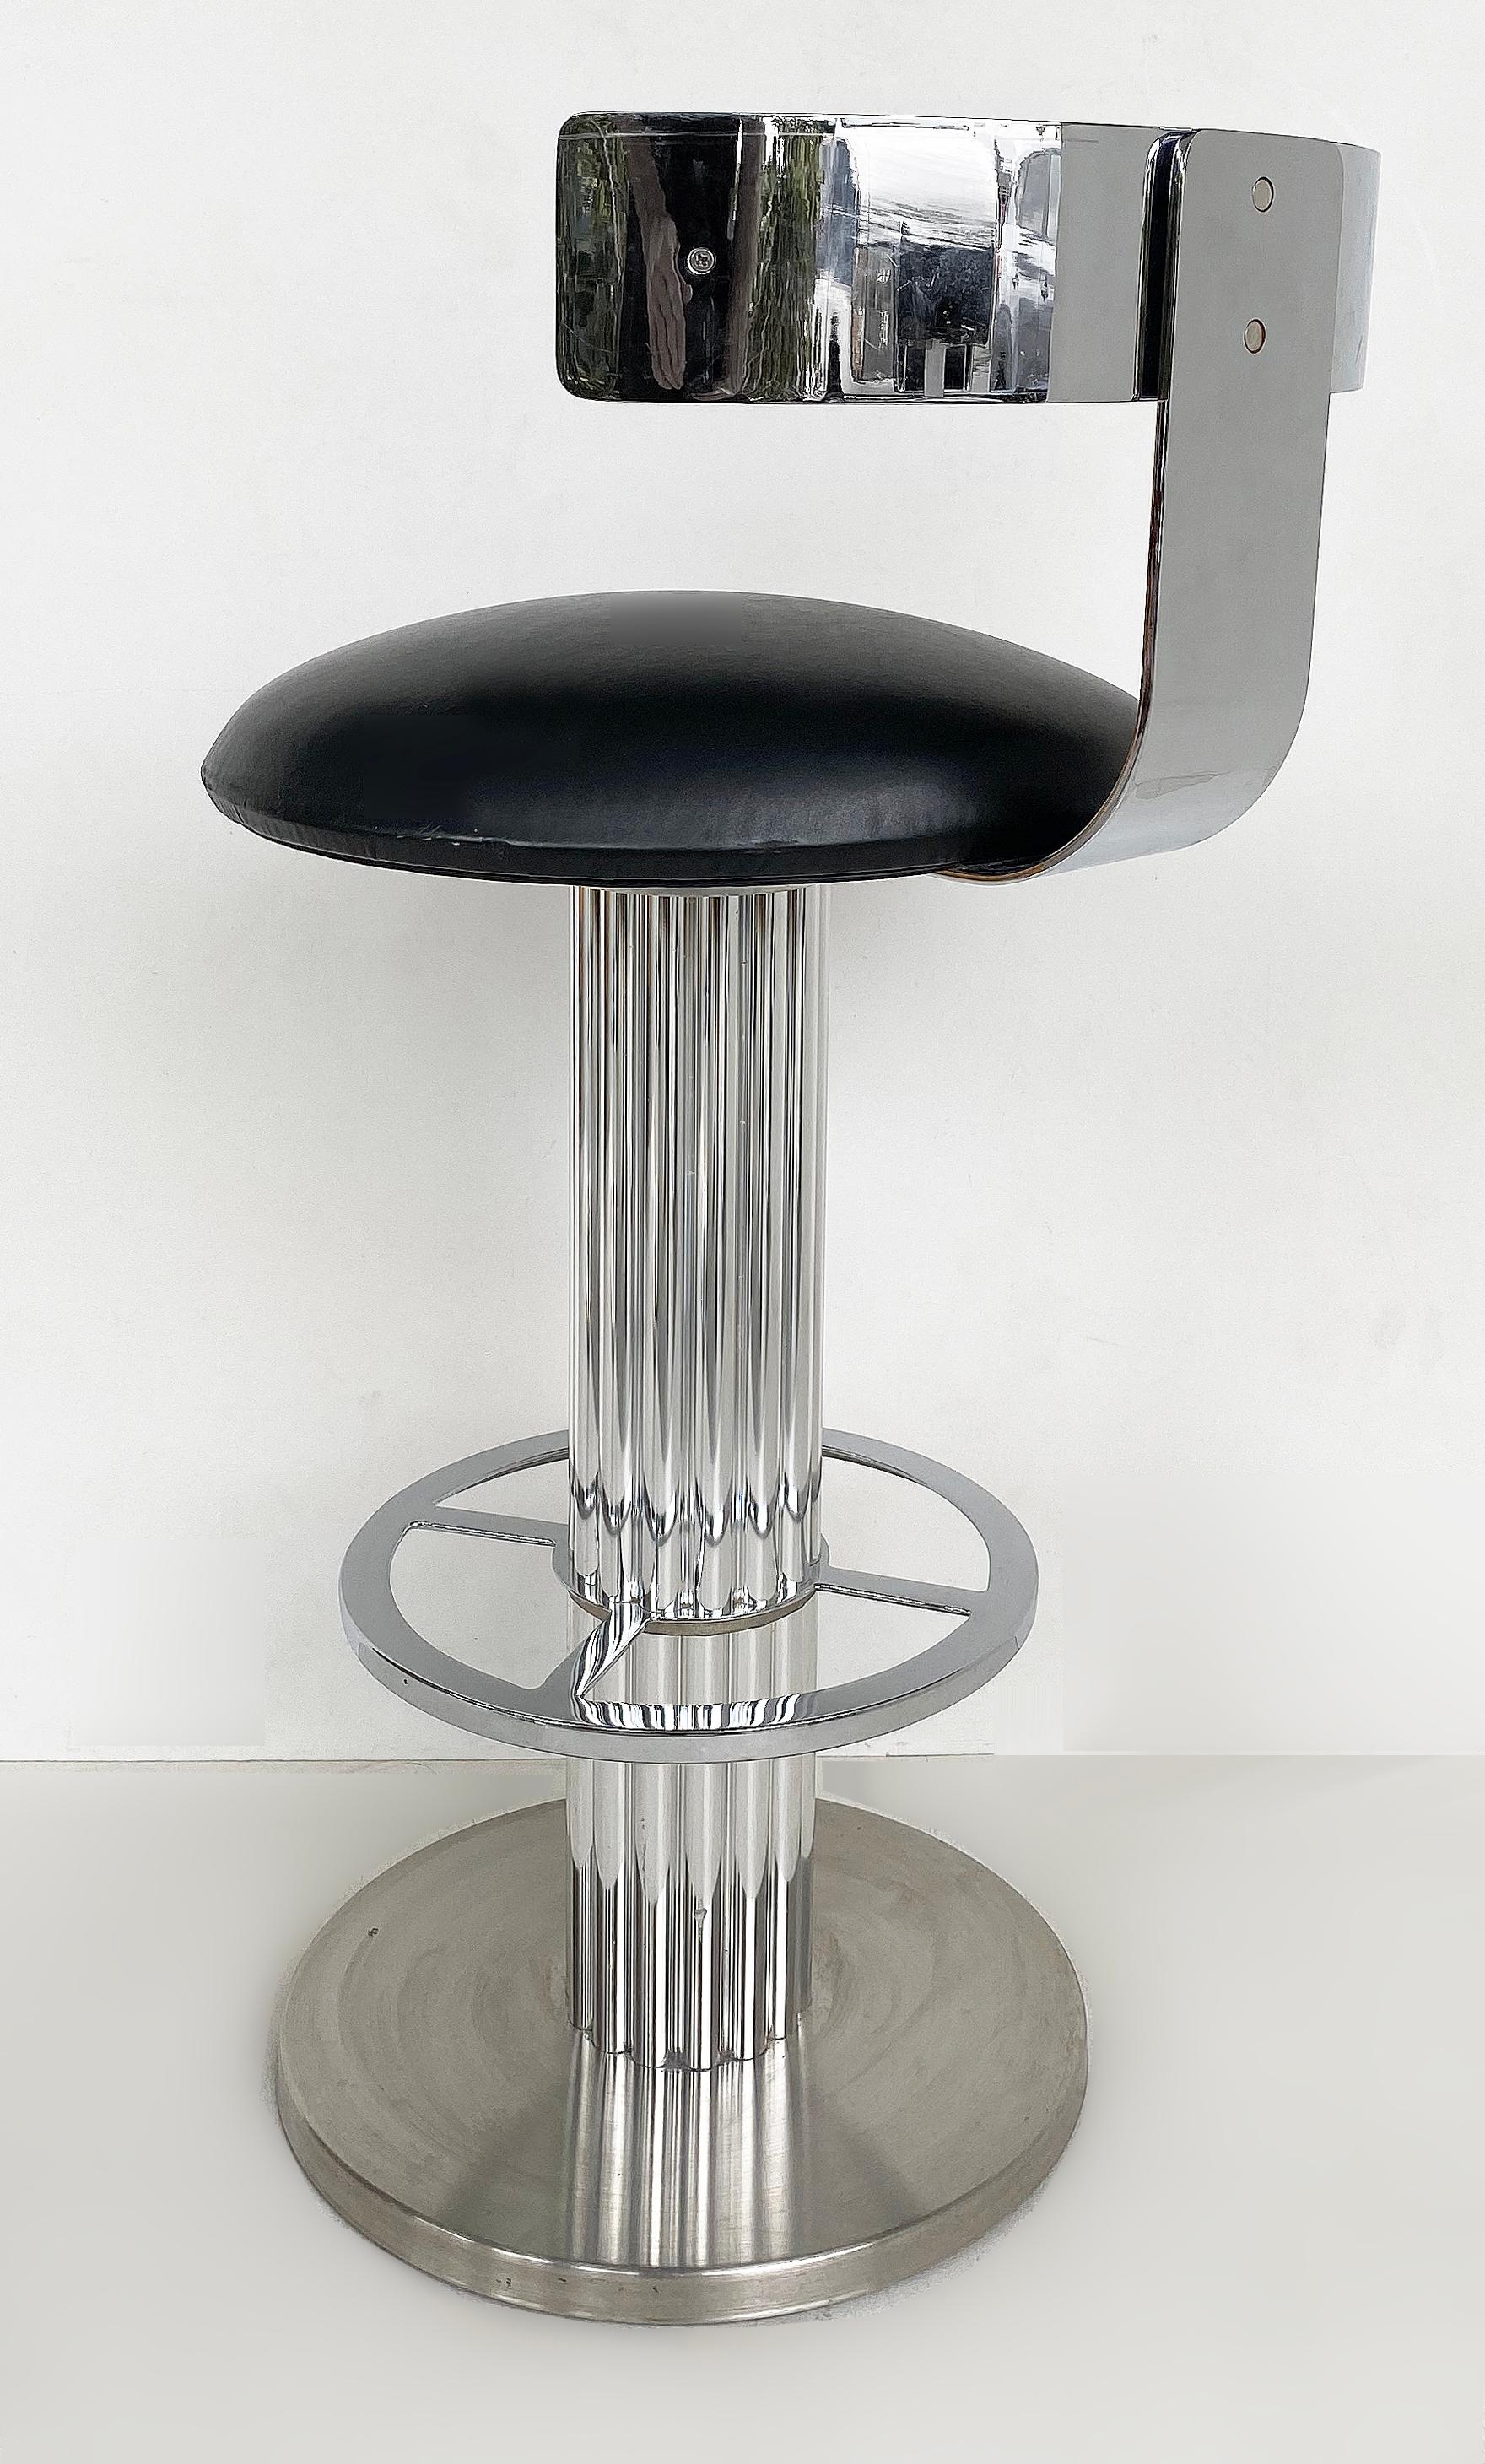 Stainless Steel Design for Leisure Swivel Bar Stools with Chrome, Nickeled Steel, Black Leather